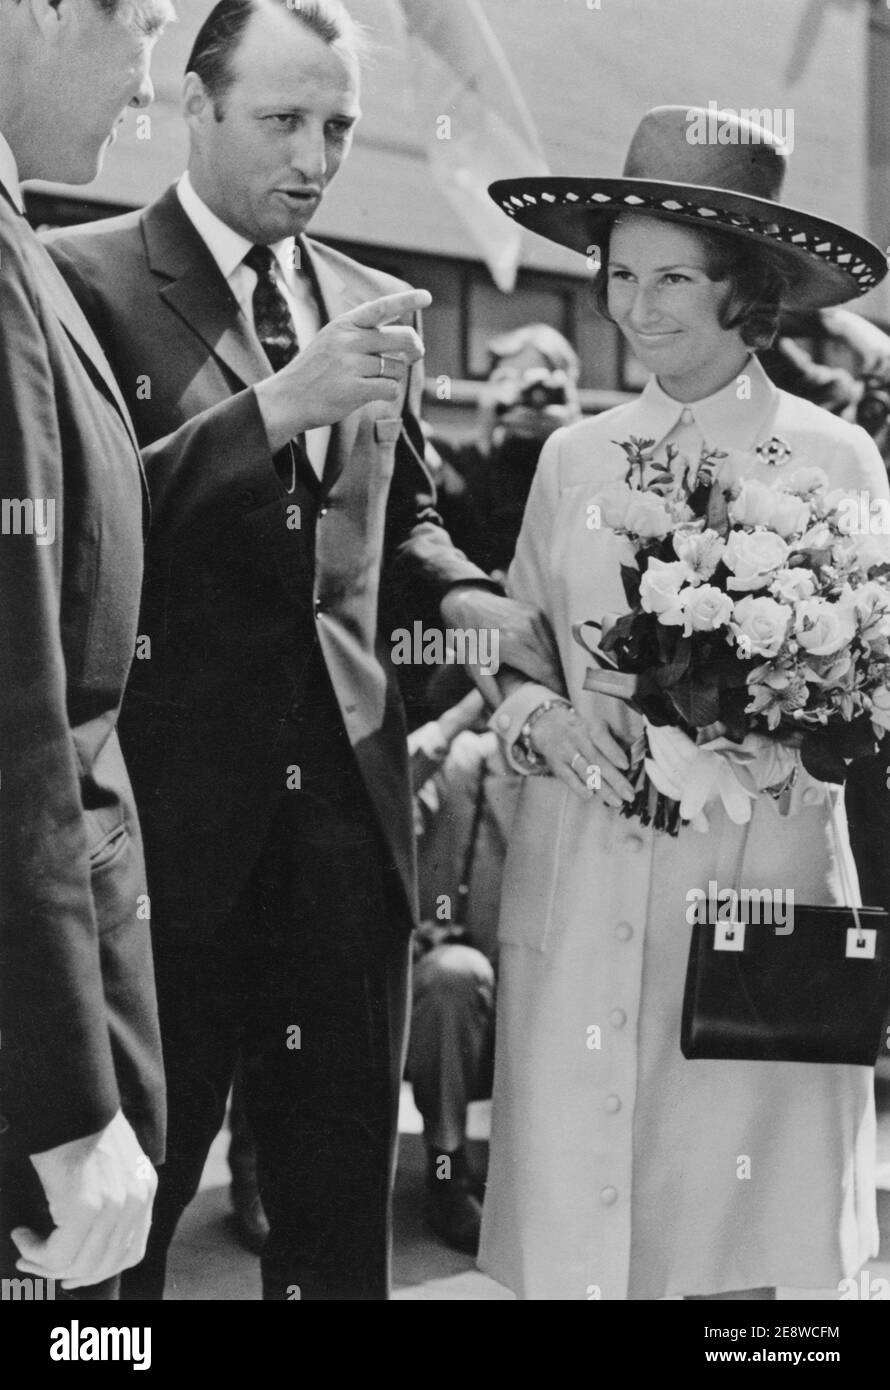 King Harald of Norway. Pictured when being crown prince with his wife Sonja in the 1960s Stock Photo